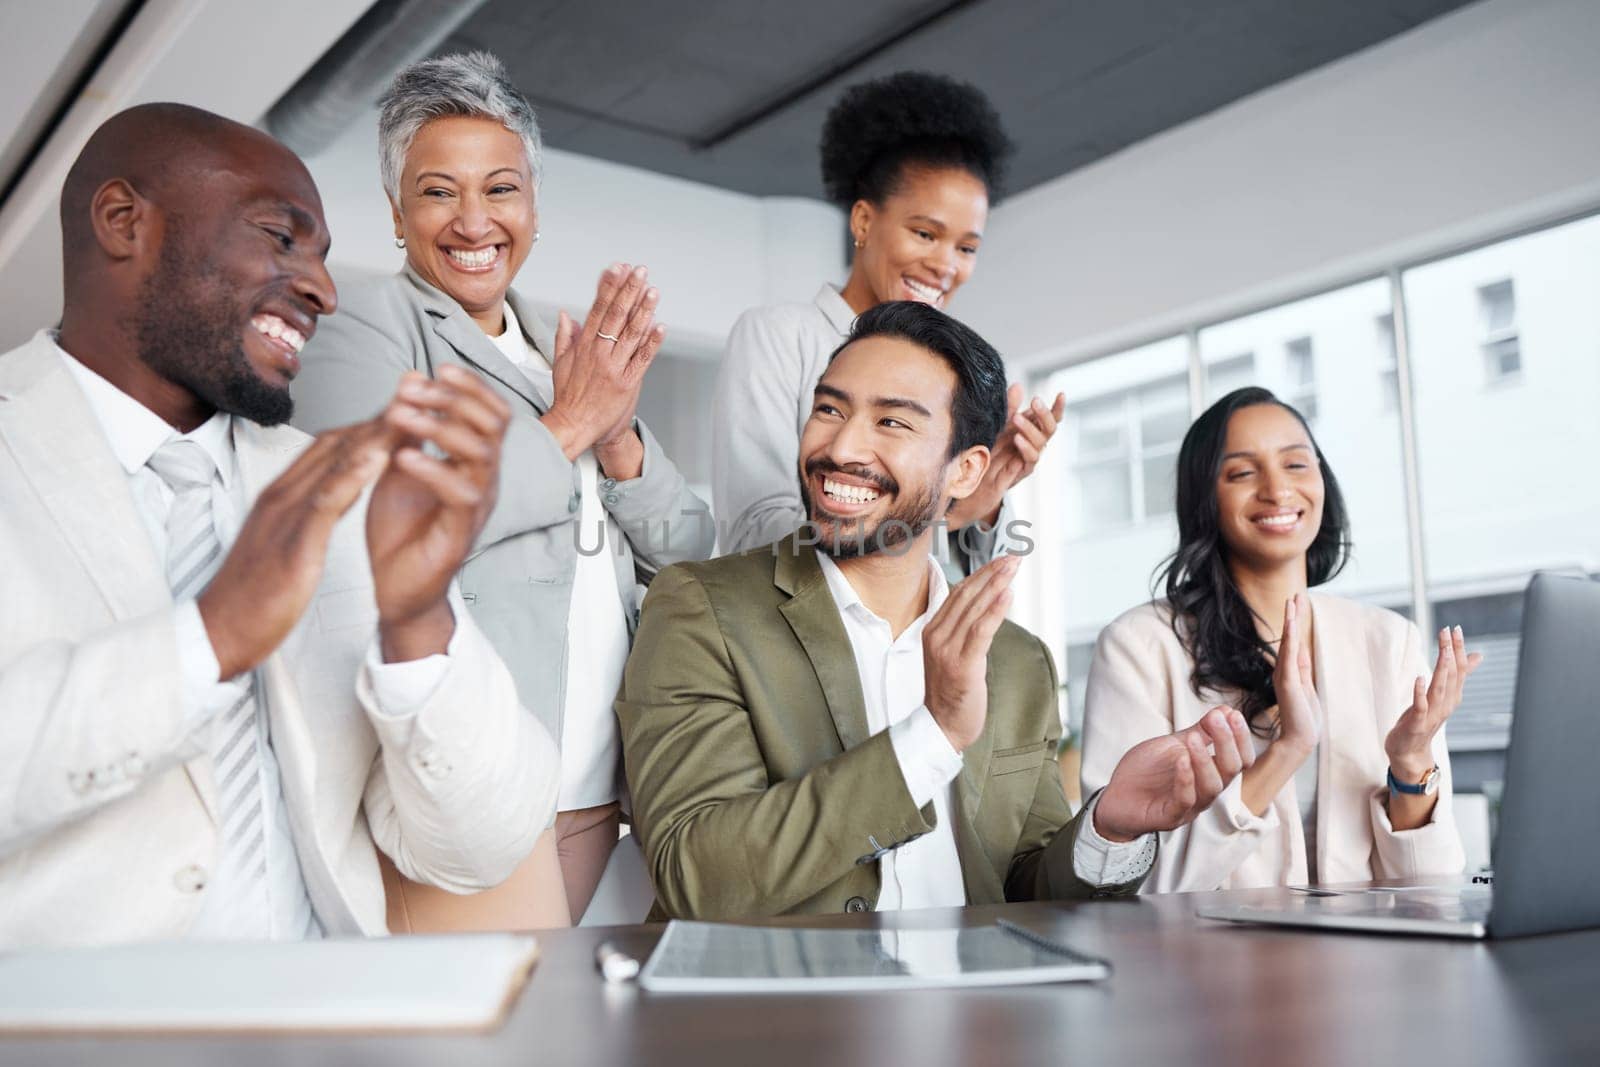 Business people, laptop and clapping hands in meeting for proposal, logo or reveal in office. Team, applause and corporate success by group celebrating achievement, project and job well done together.